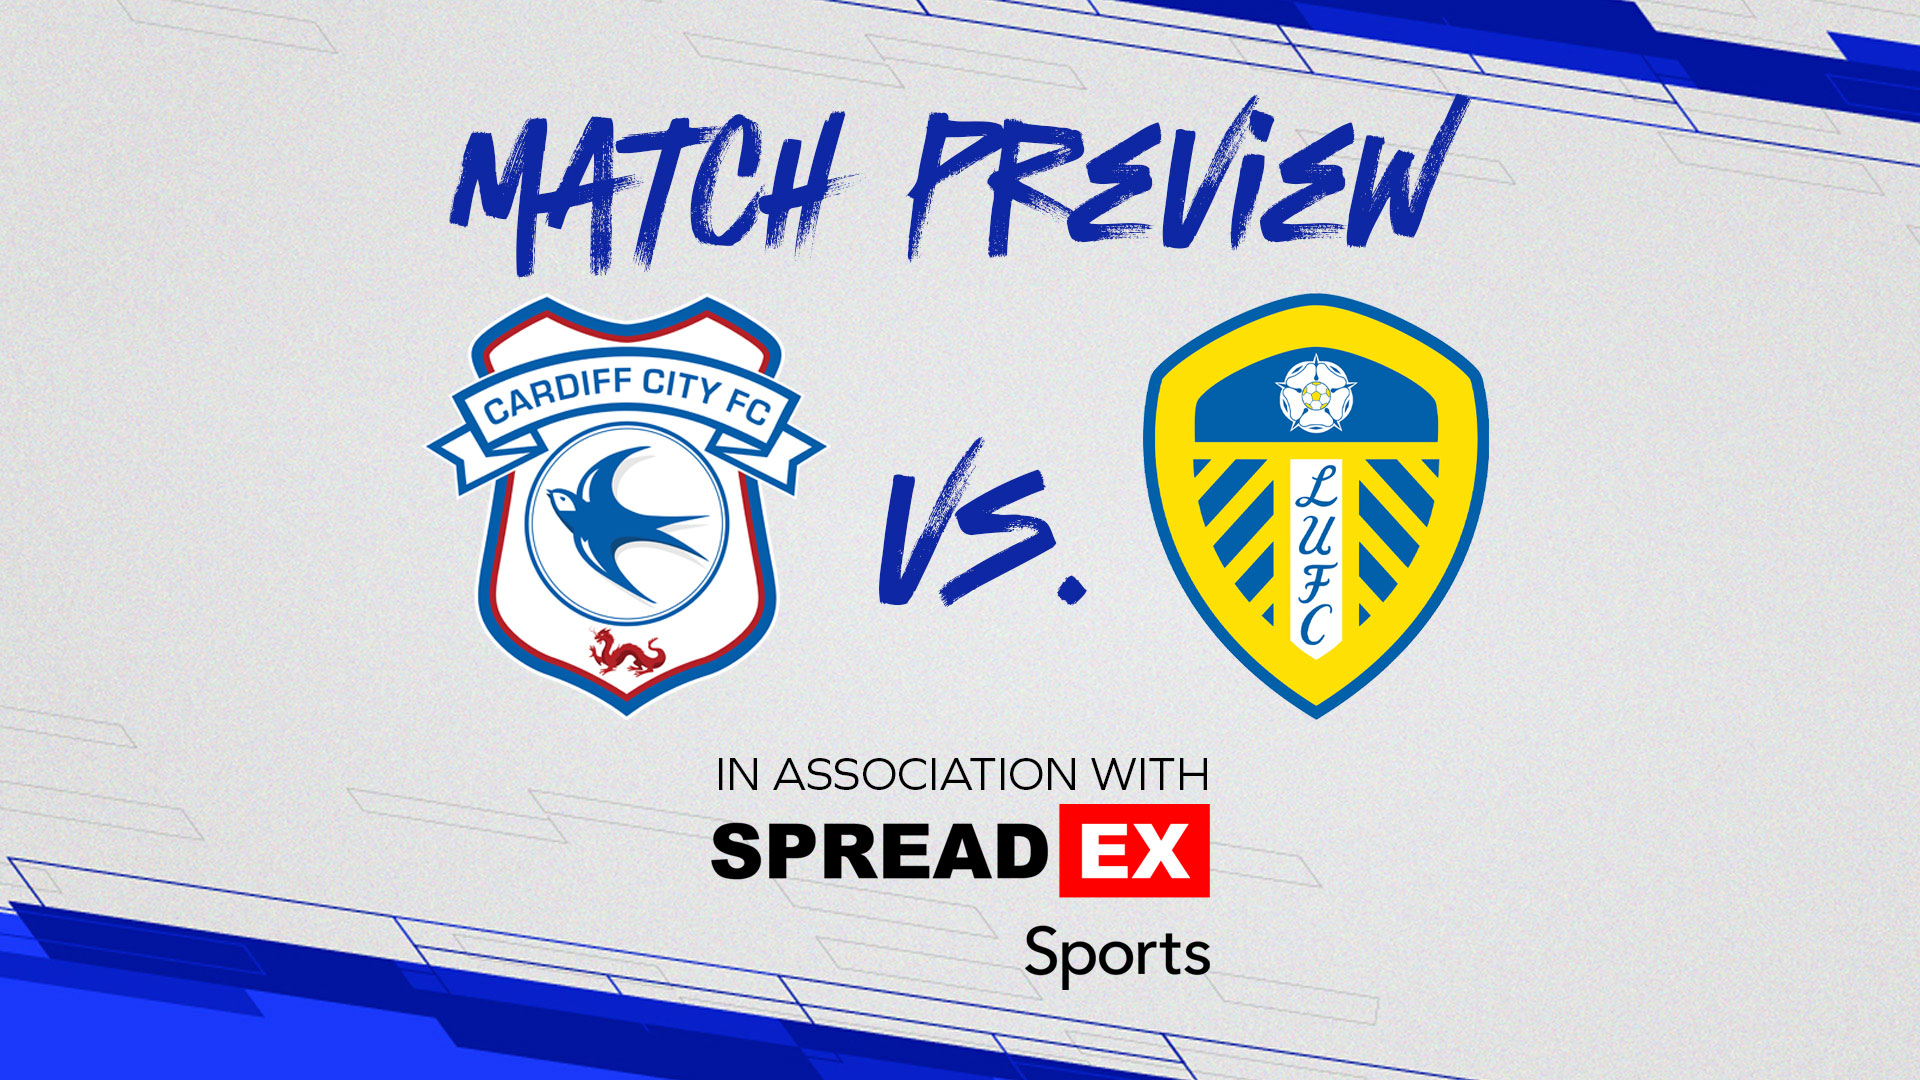 Match Preview: Cardiff City vs. Leeds United